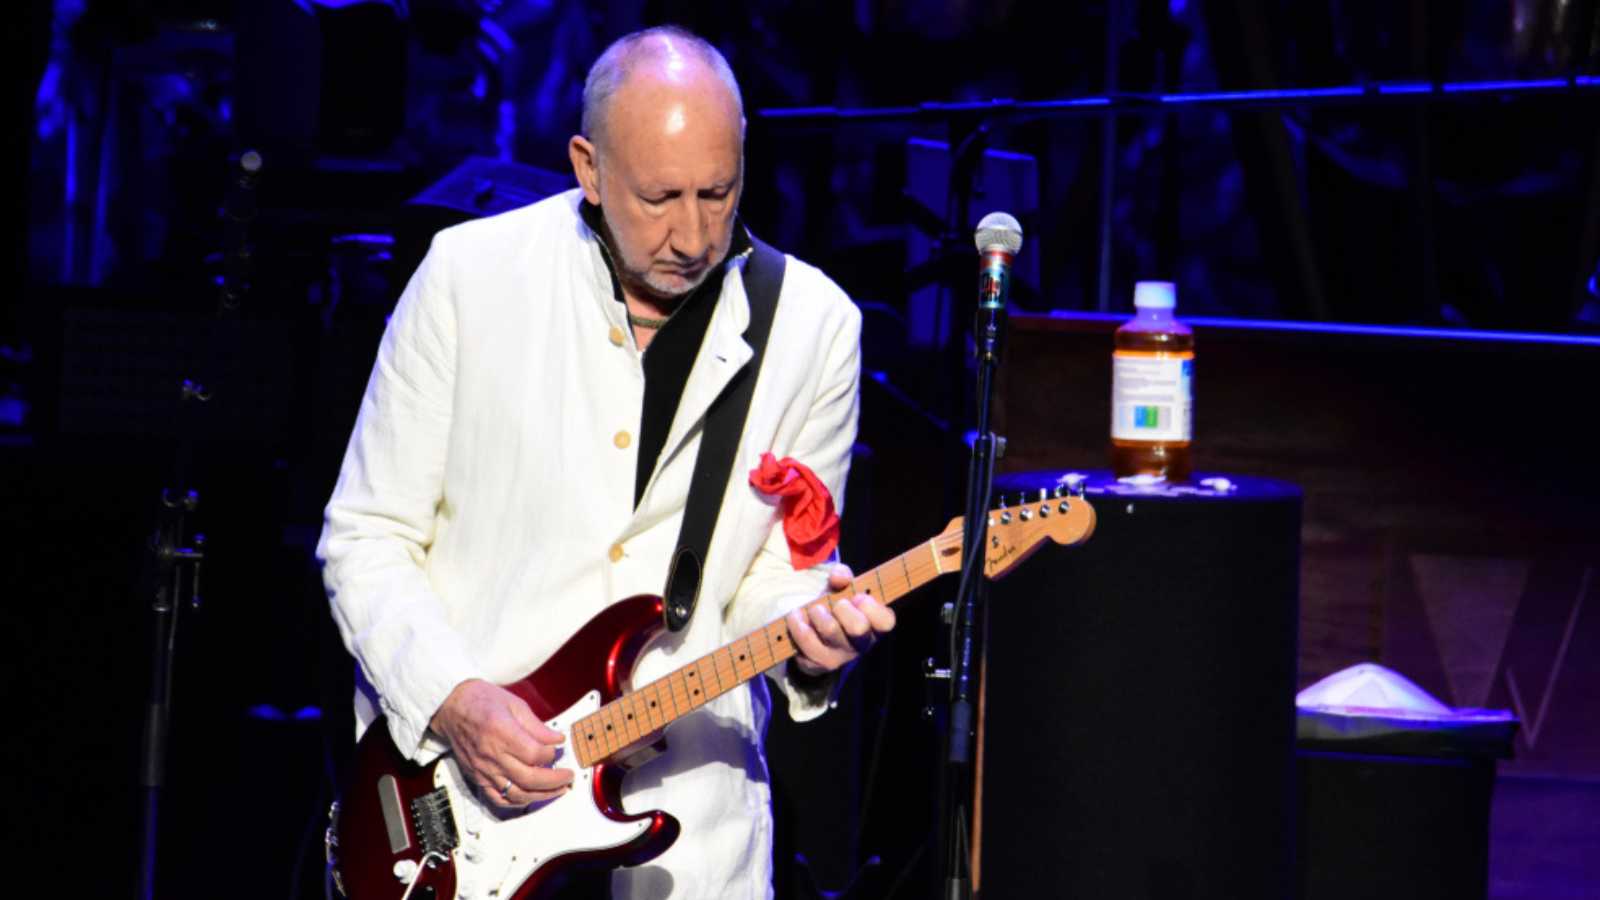 Tinley Park, IL / USA - May 21, 2019: Roger Daltrey and Pete Townshend of The Who "Moving On! Tour" with full orchestra performing music from the rock opera "Tommy" and "Quadrophenia"
